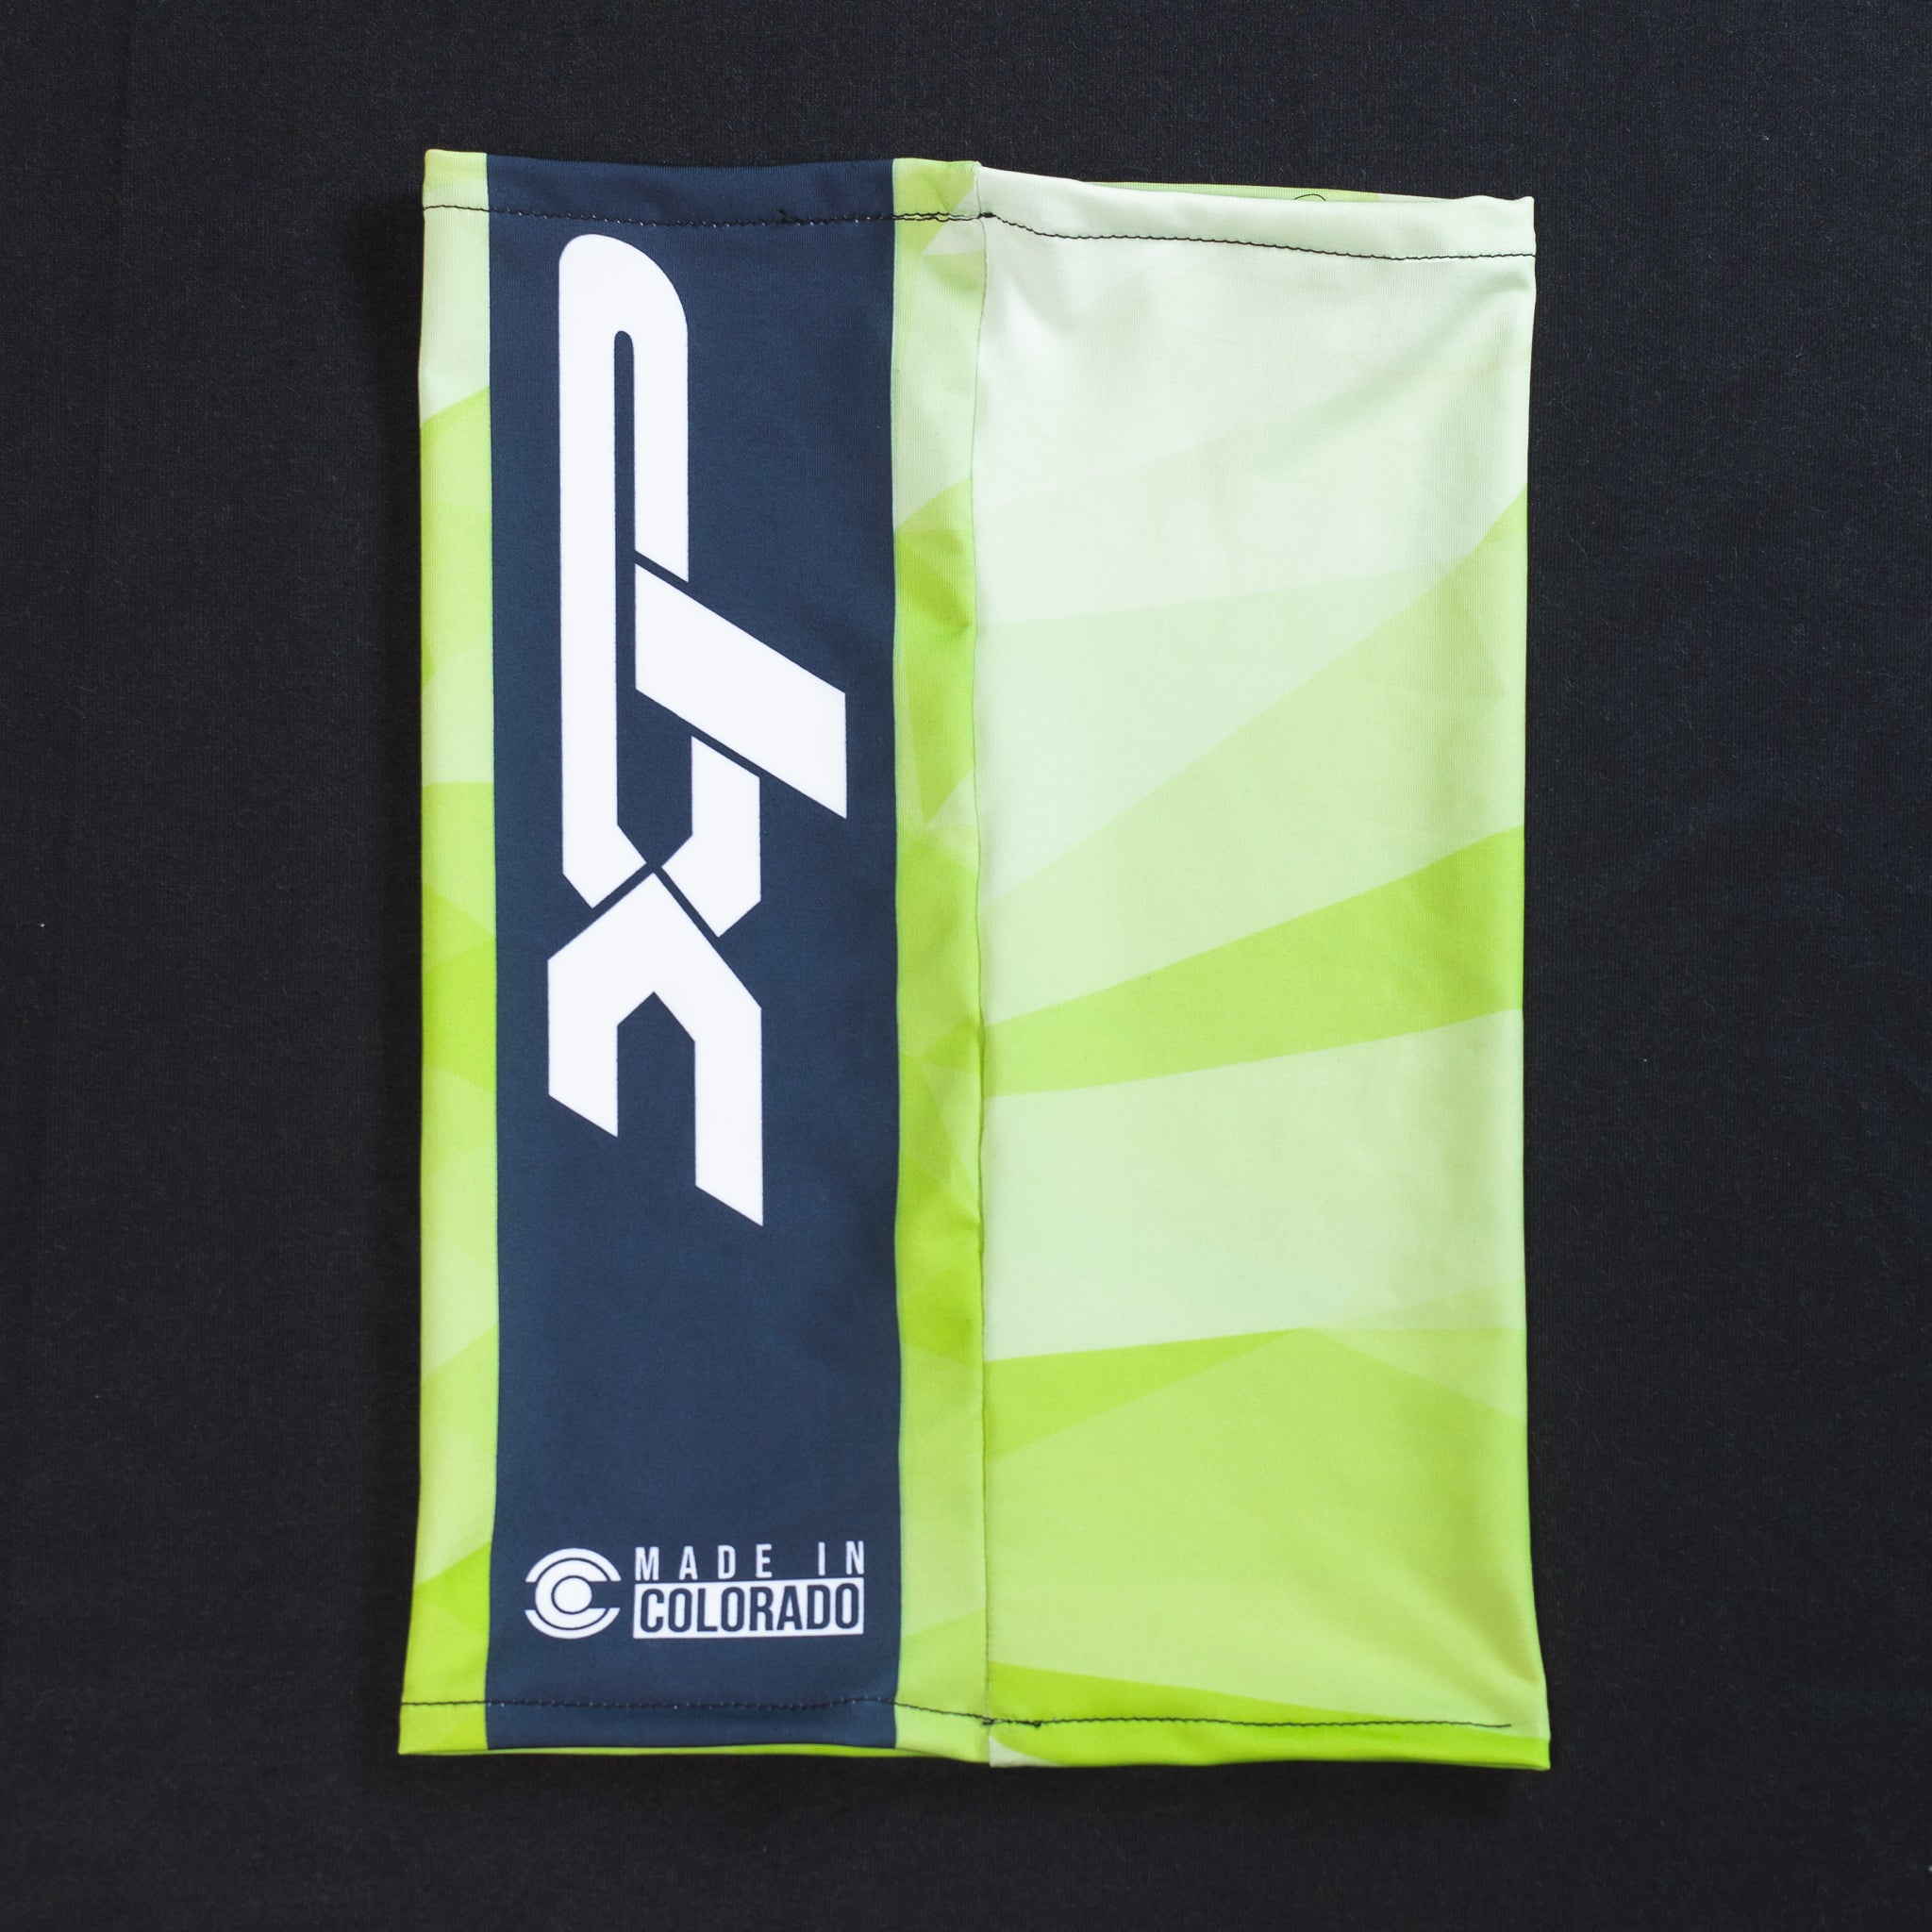 Sublimated Antimicrobial Neck Gaiter in Green Xtreme Pro Apparel